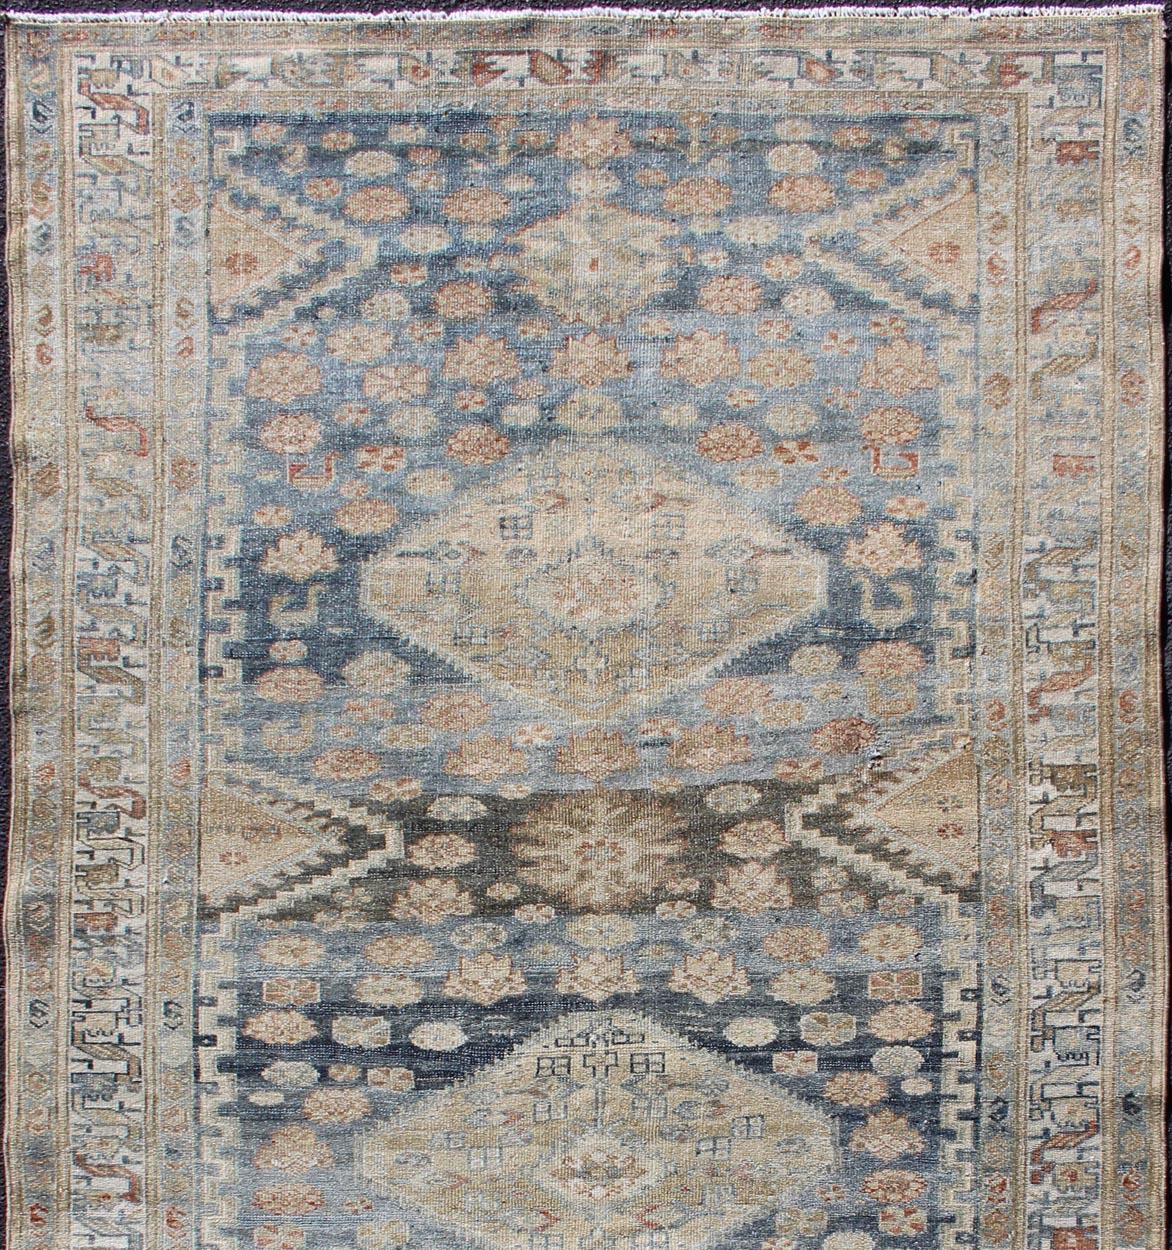 Tribal Persian Malayer rug with geometric design in dark and steel blue and tan tones,
Gray, taupe, light blue, tan and brown geometric Persian Malayer rug, rug EMA-7543 country of origin / type: Iran / Tabriz, circa 1920.

This antique Malayer